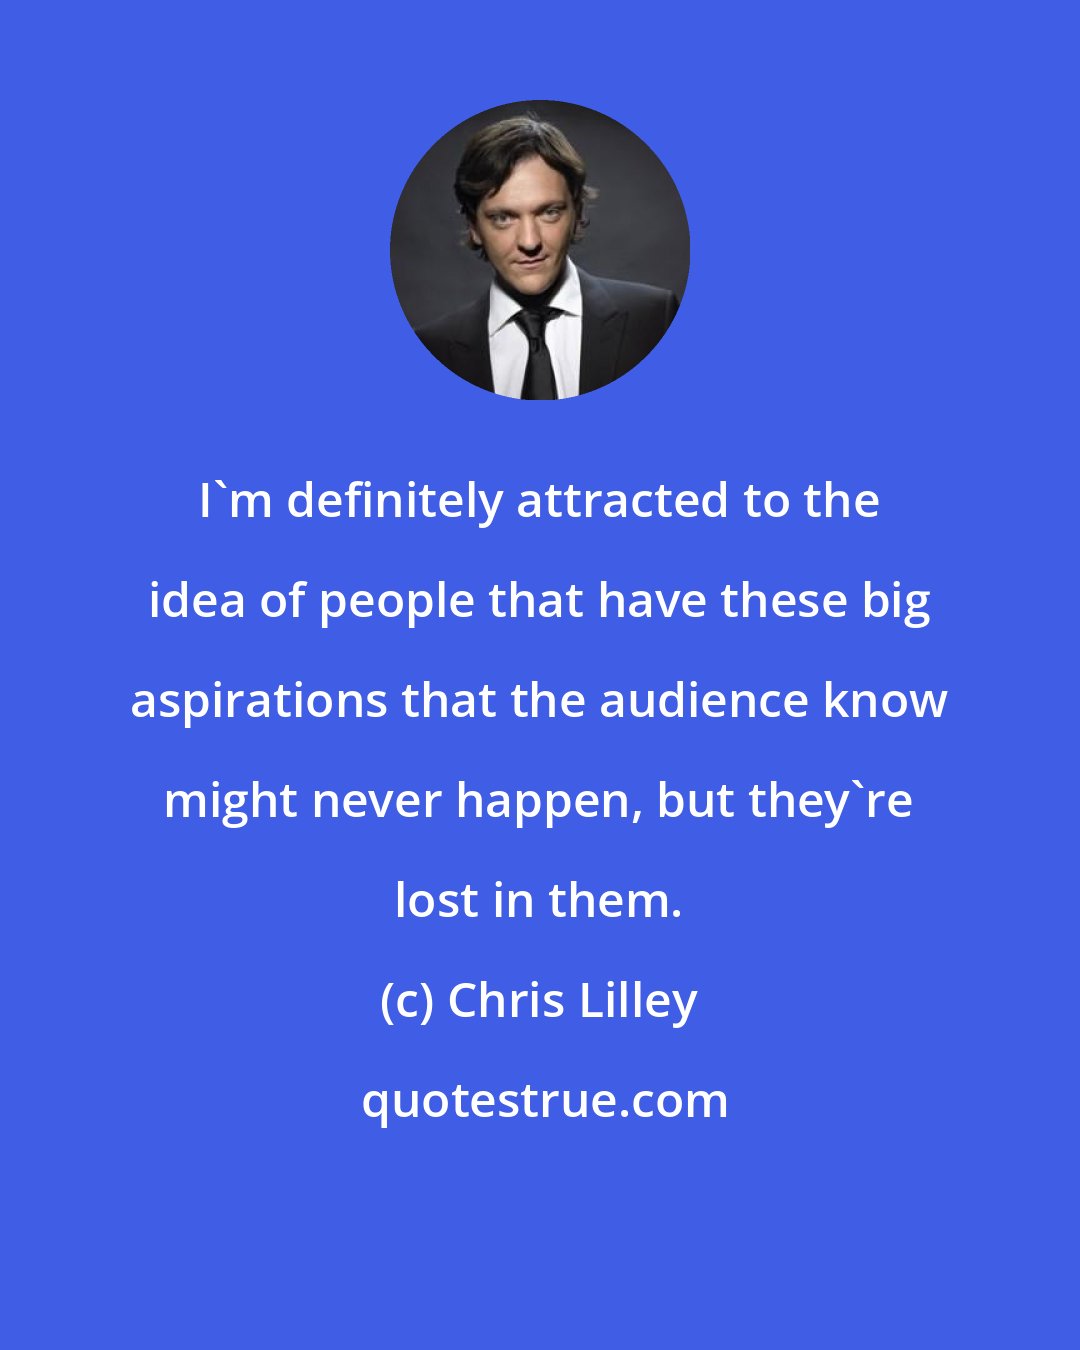 Chris Lilley: I'm definitely attracted to the idea of people that have these big aspirations that the audience know might never happen, but they're lost in them.